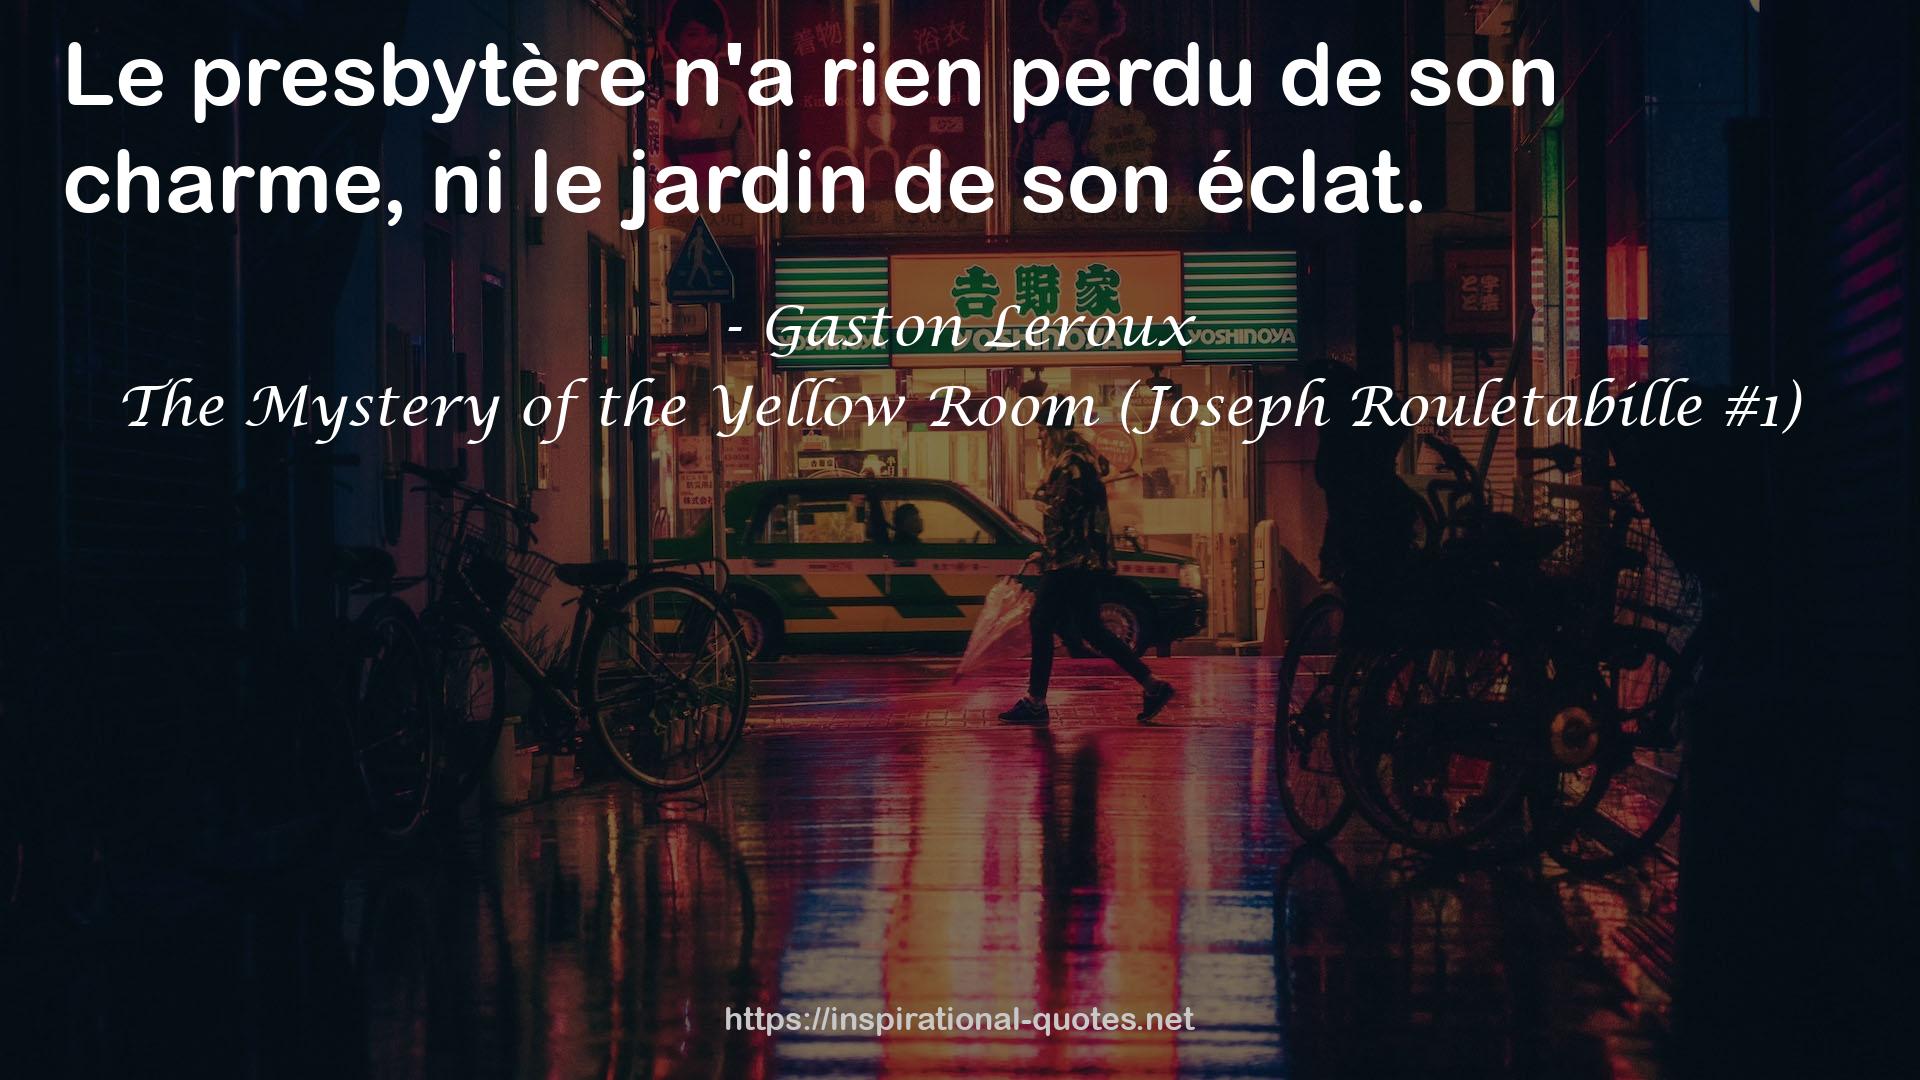 The Mystery of the Yellow Room (Joseph Rouletabille #1) QUOTES